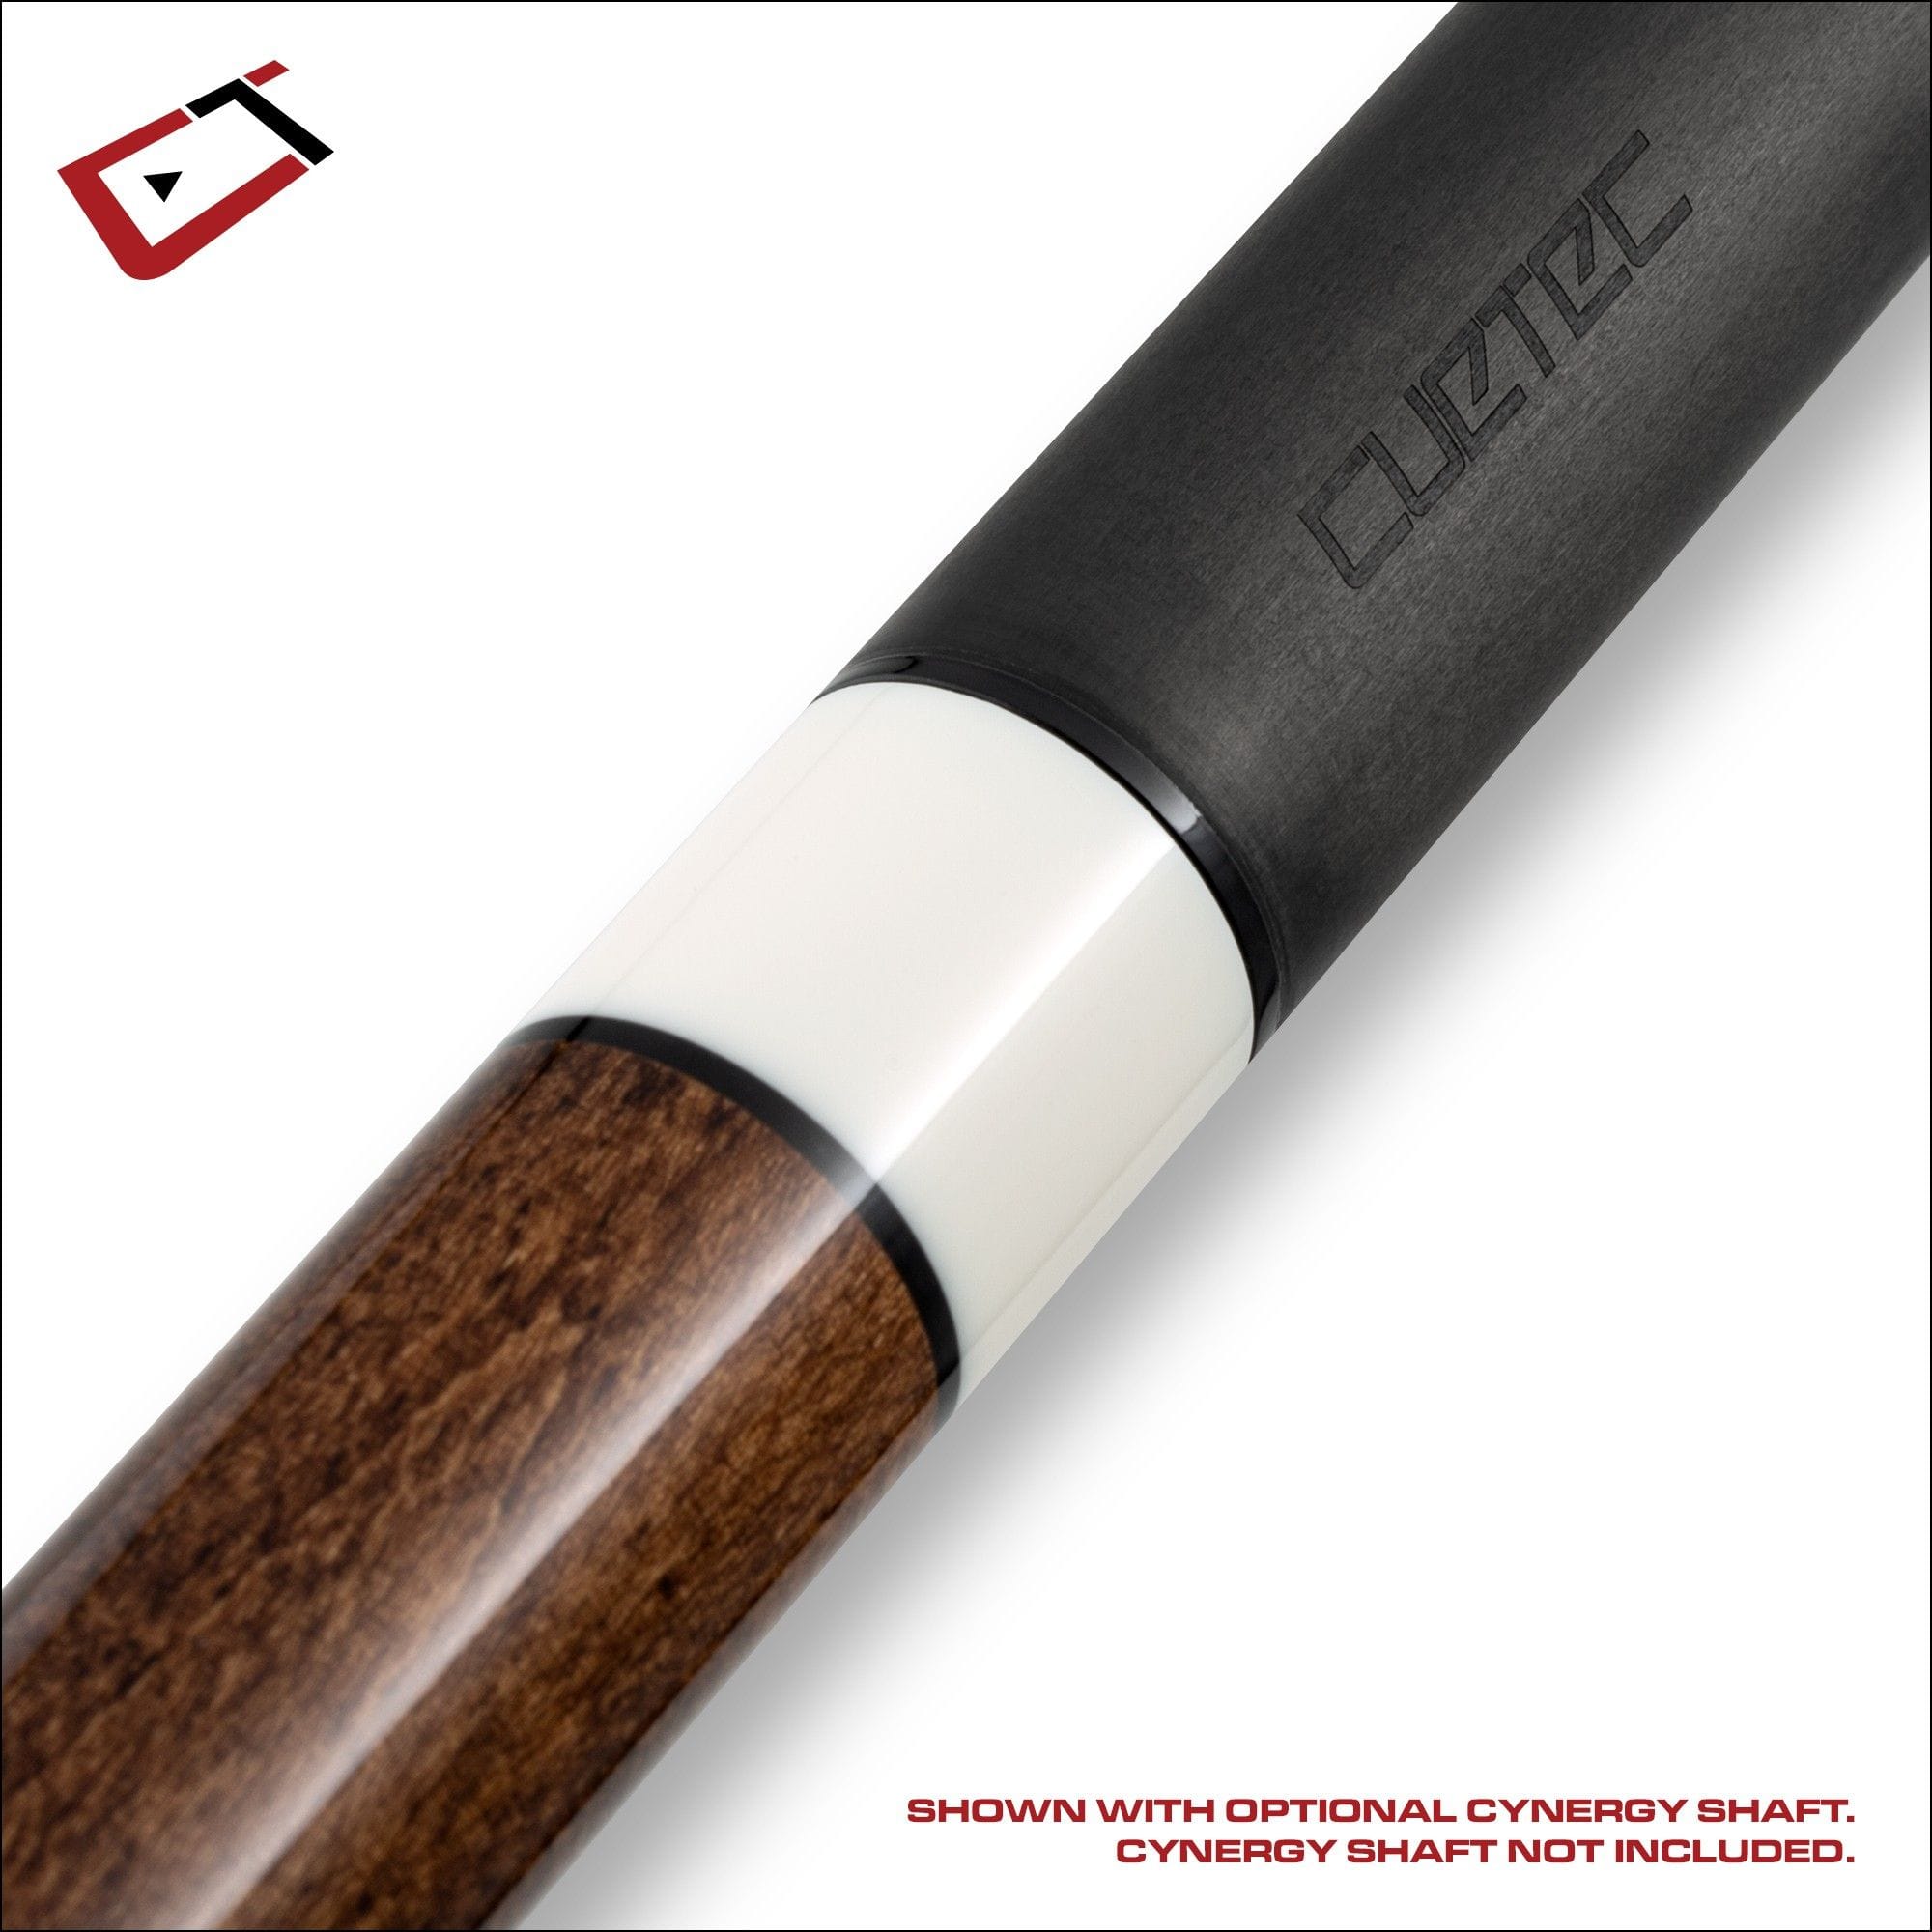 Imperial Pool Cue Imperial - AVID ERA Brown 4 PT Cue NW 11.75MM - 95-322NW-S